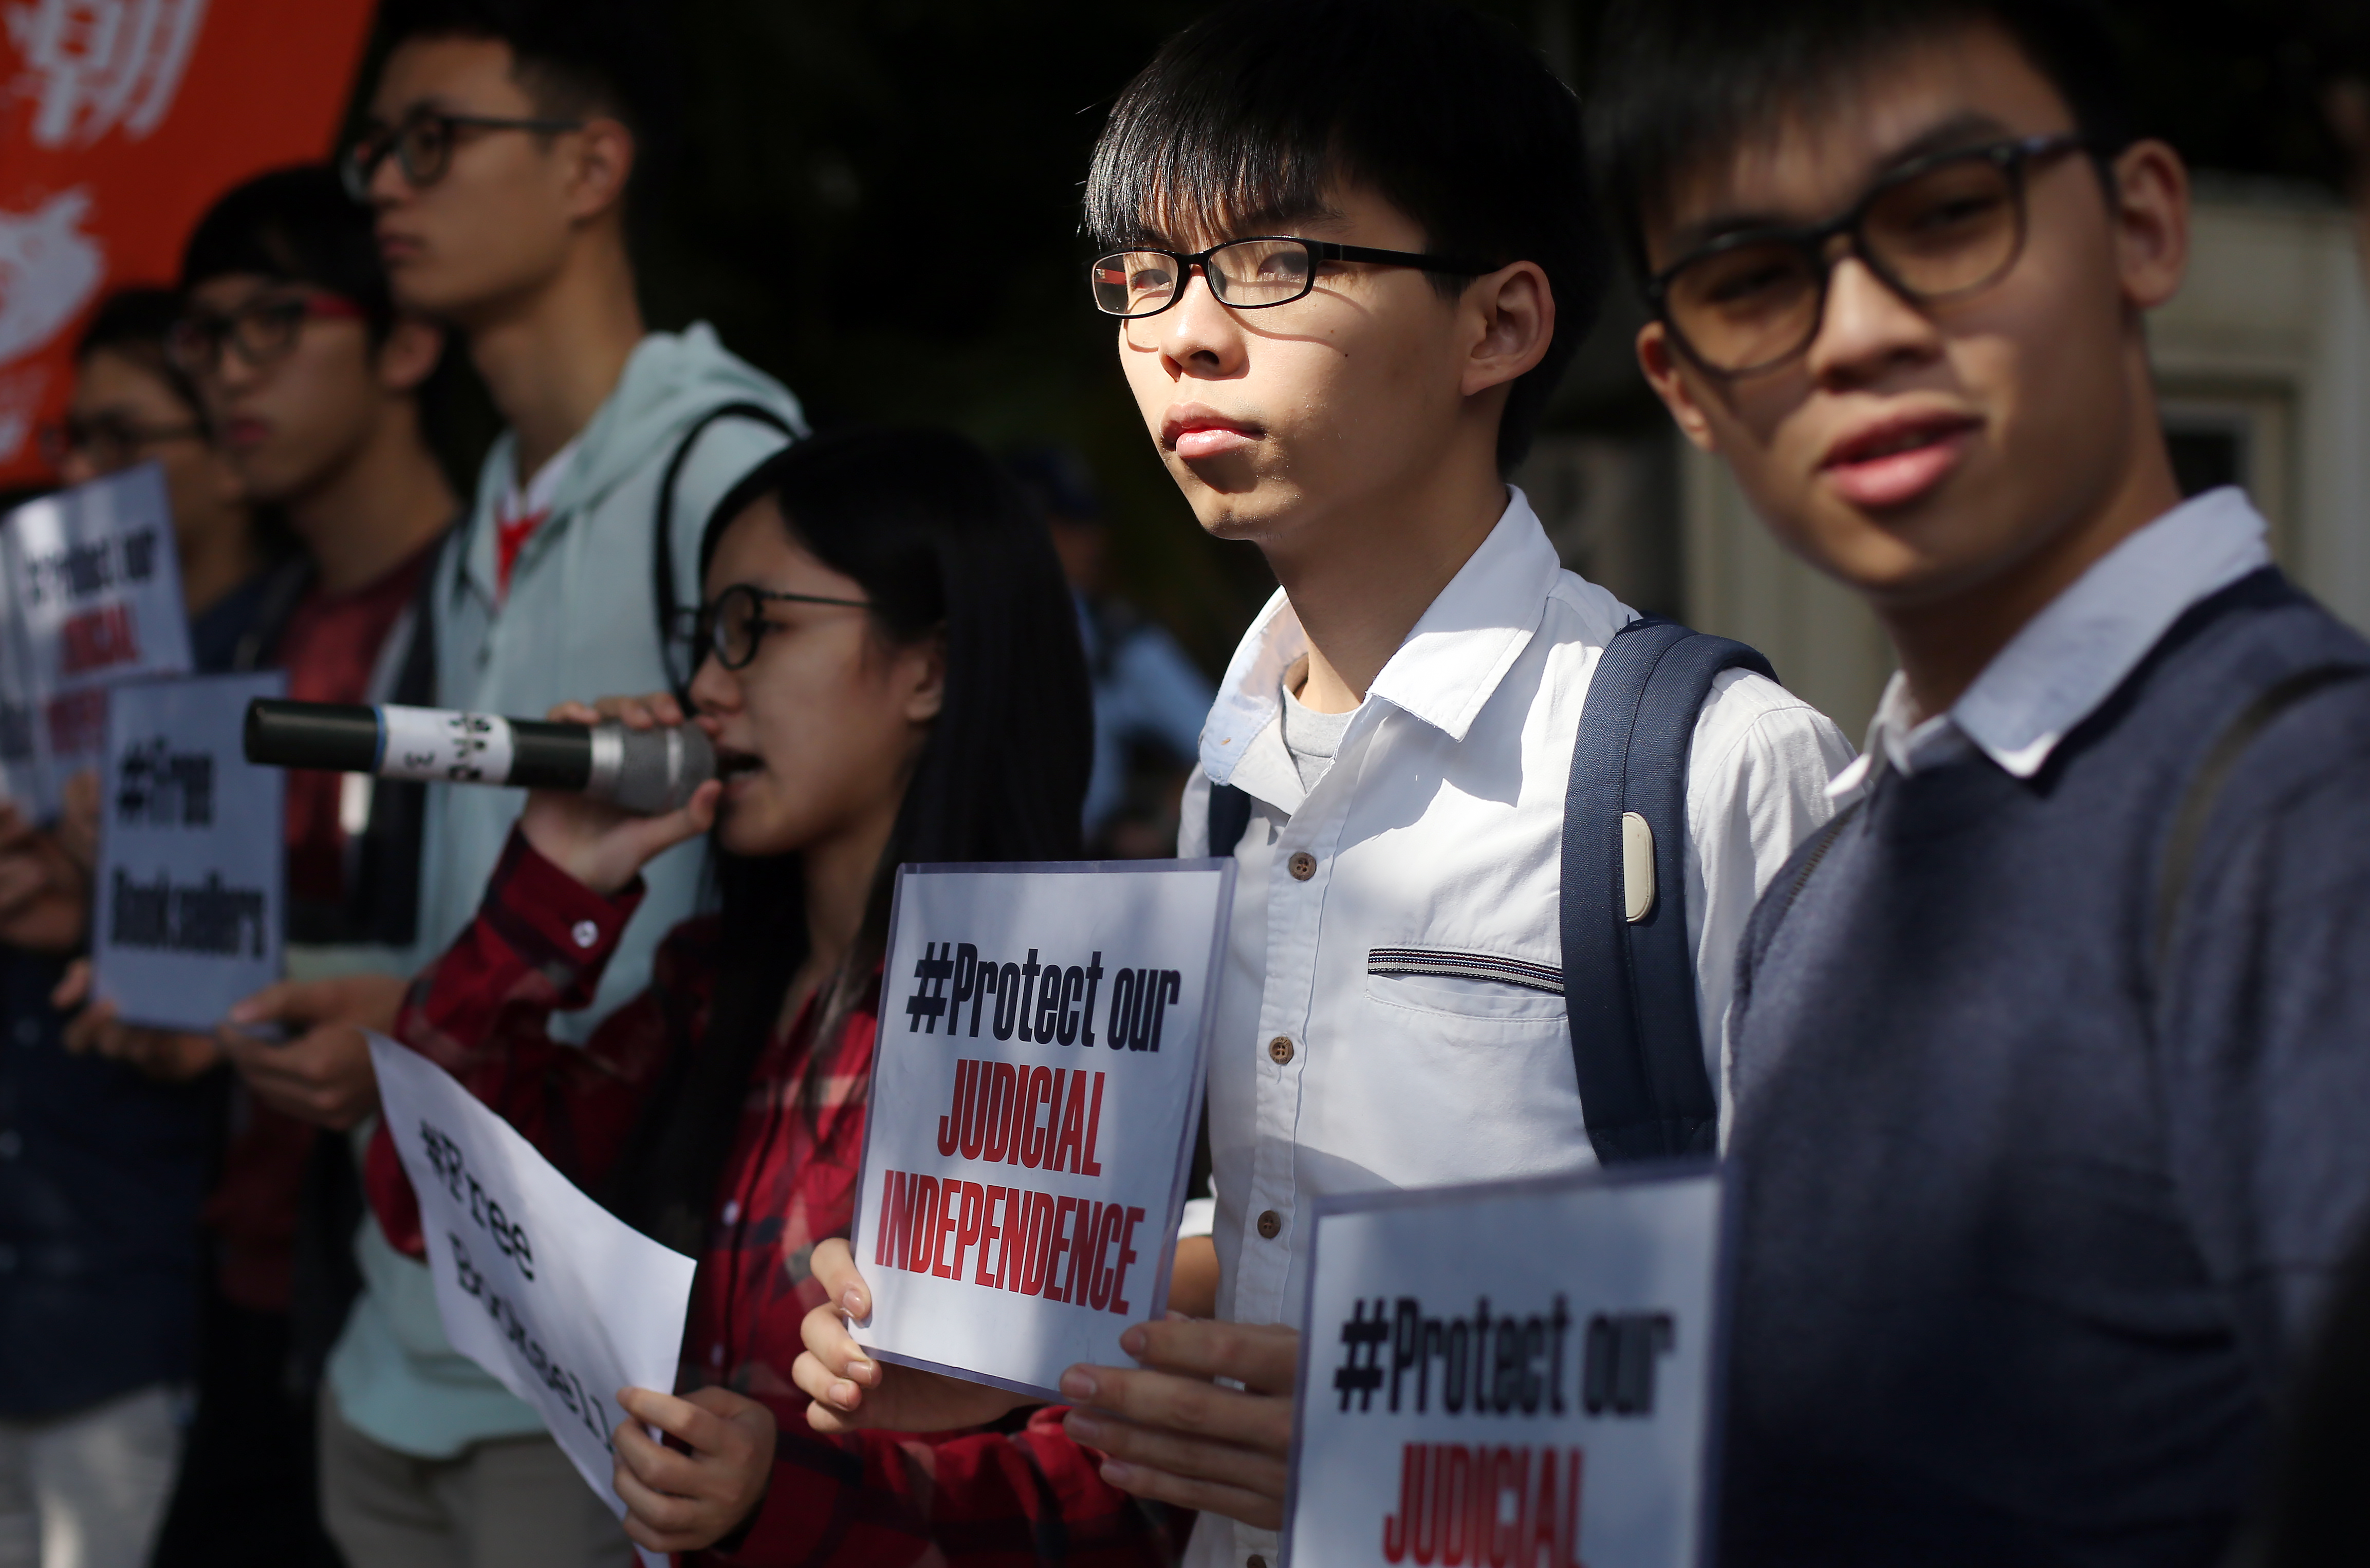 Scholarism members protest over the disappearance of several Hong Kong booksellers outside the US consulate in Hong Kong. Photo: Sam Tsang